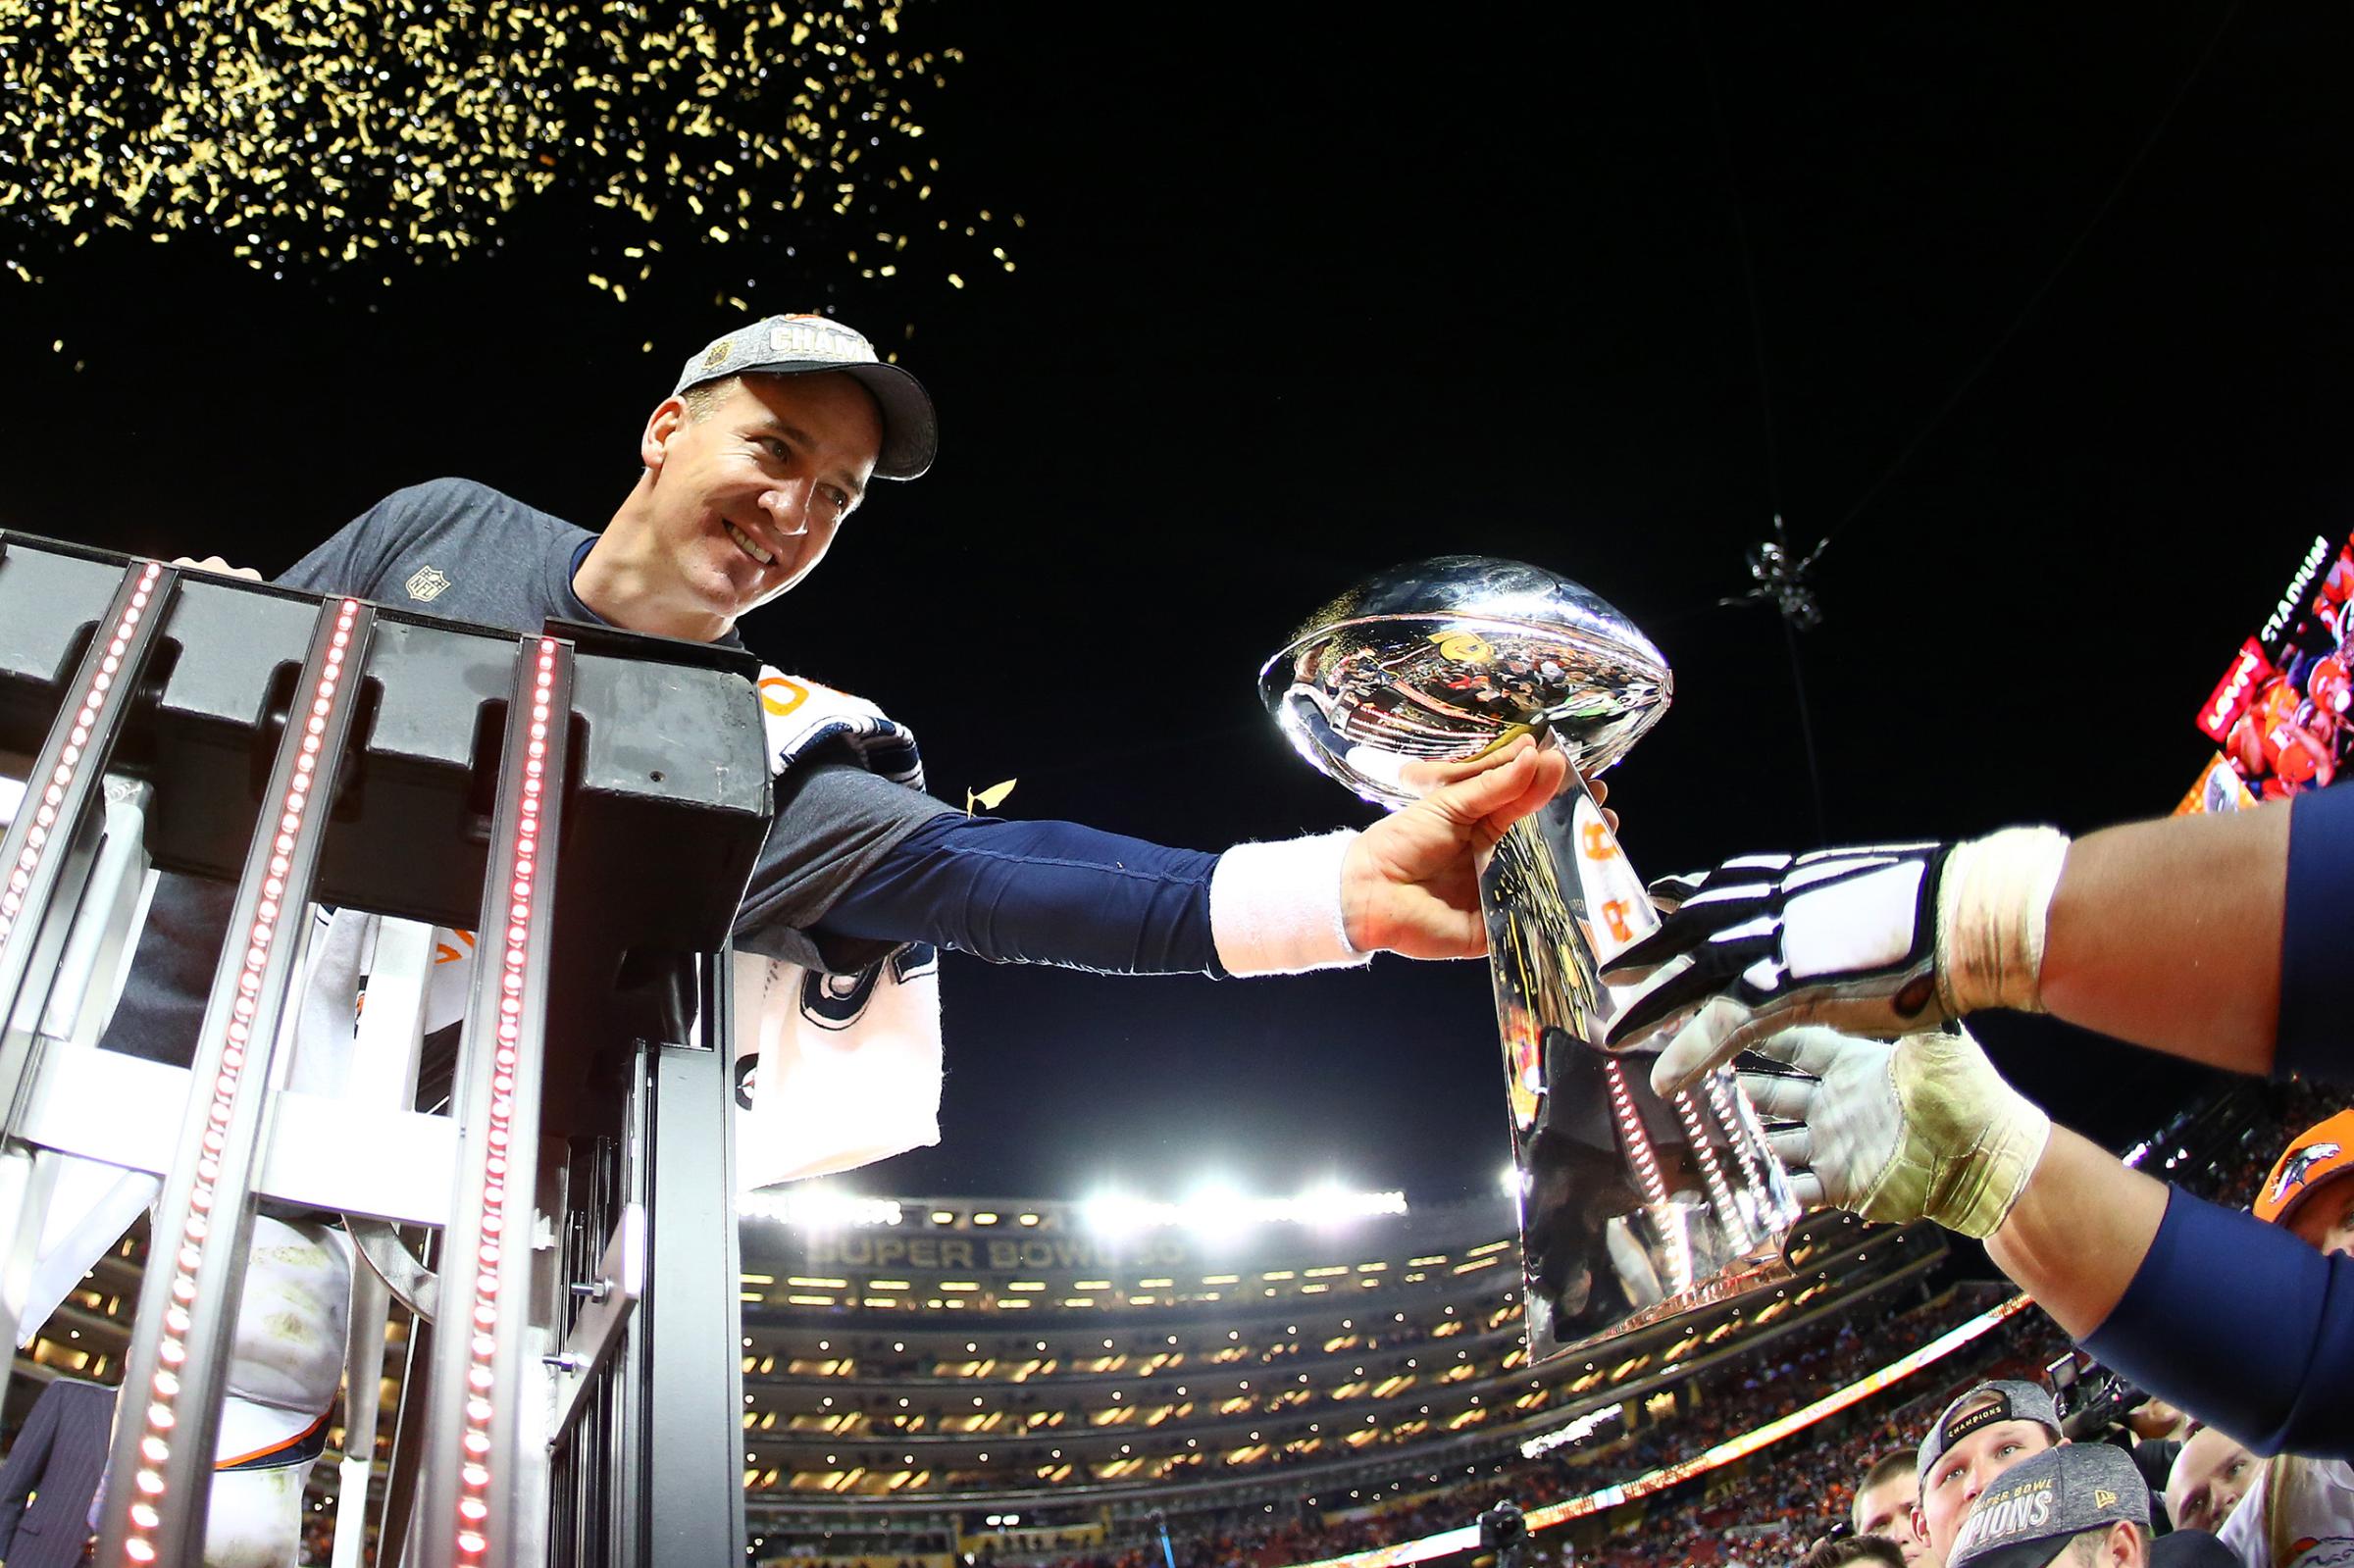 Peyton Manning of the Denver Broncos is handed the Vince Lombardi Trophy after defeating the Carolina Panthers during Super Bowl 50 at Levi's Stadium on Feb. 7, 2016 in Santa Clara, California.